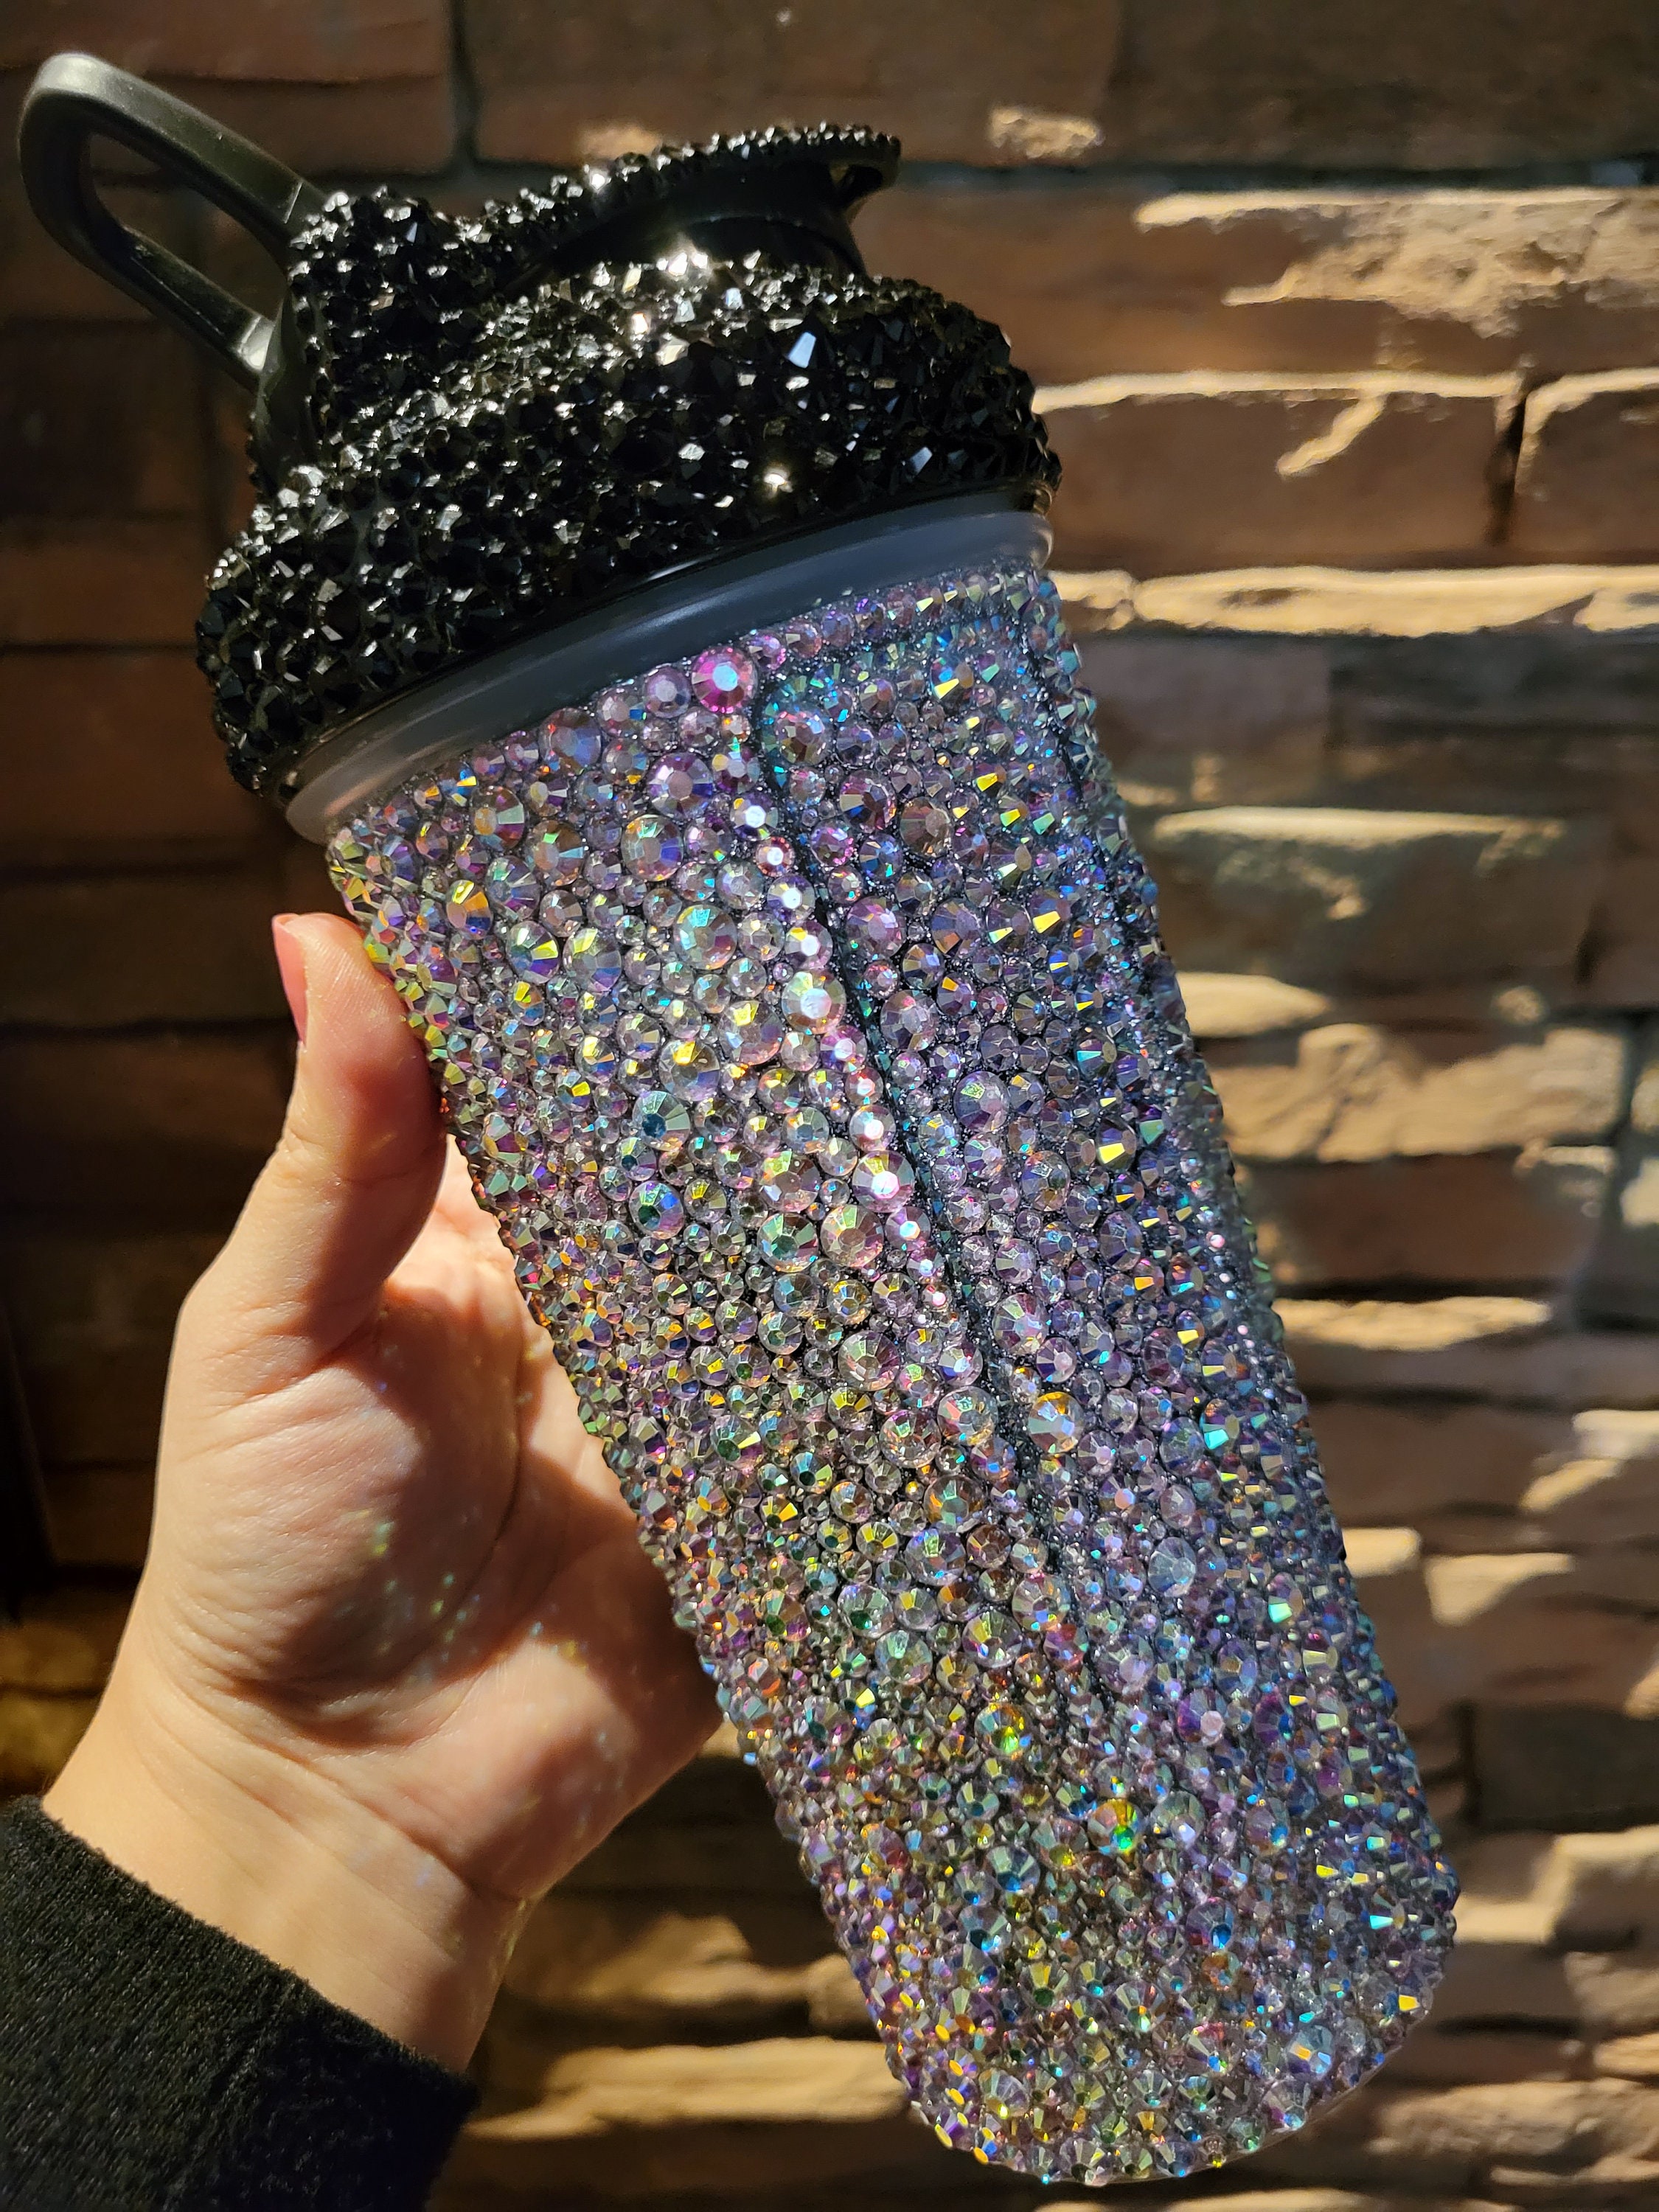 Bling Shaker Cup Fitness Gifts for Women Rhinestone Fitness